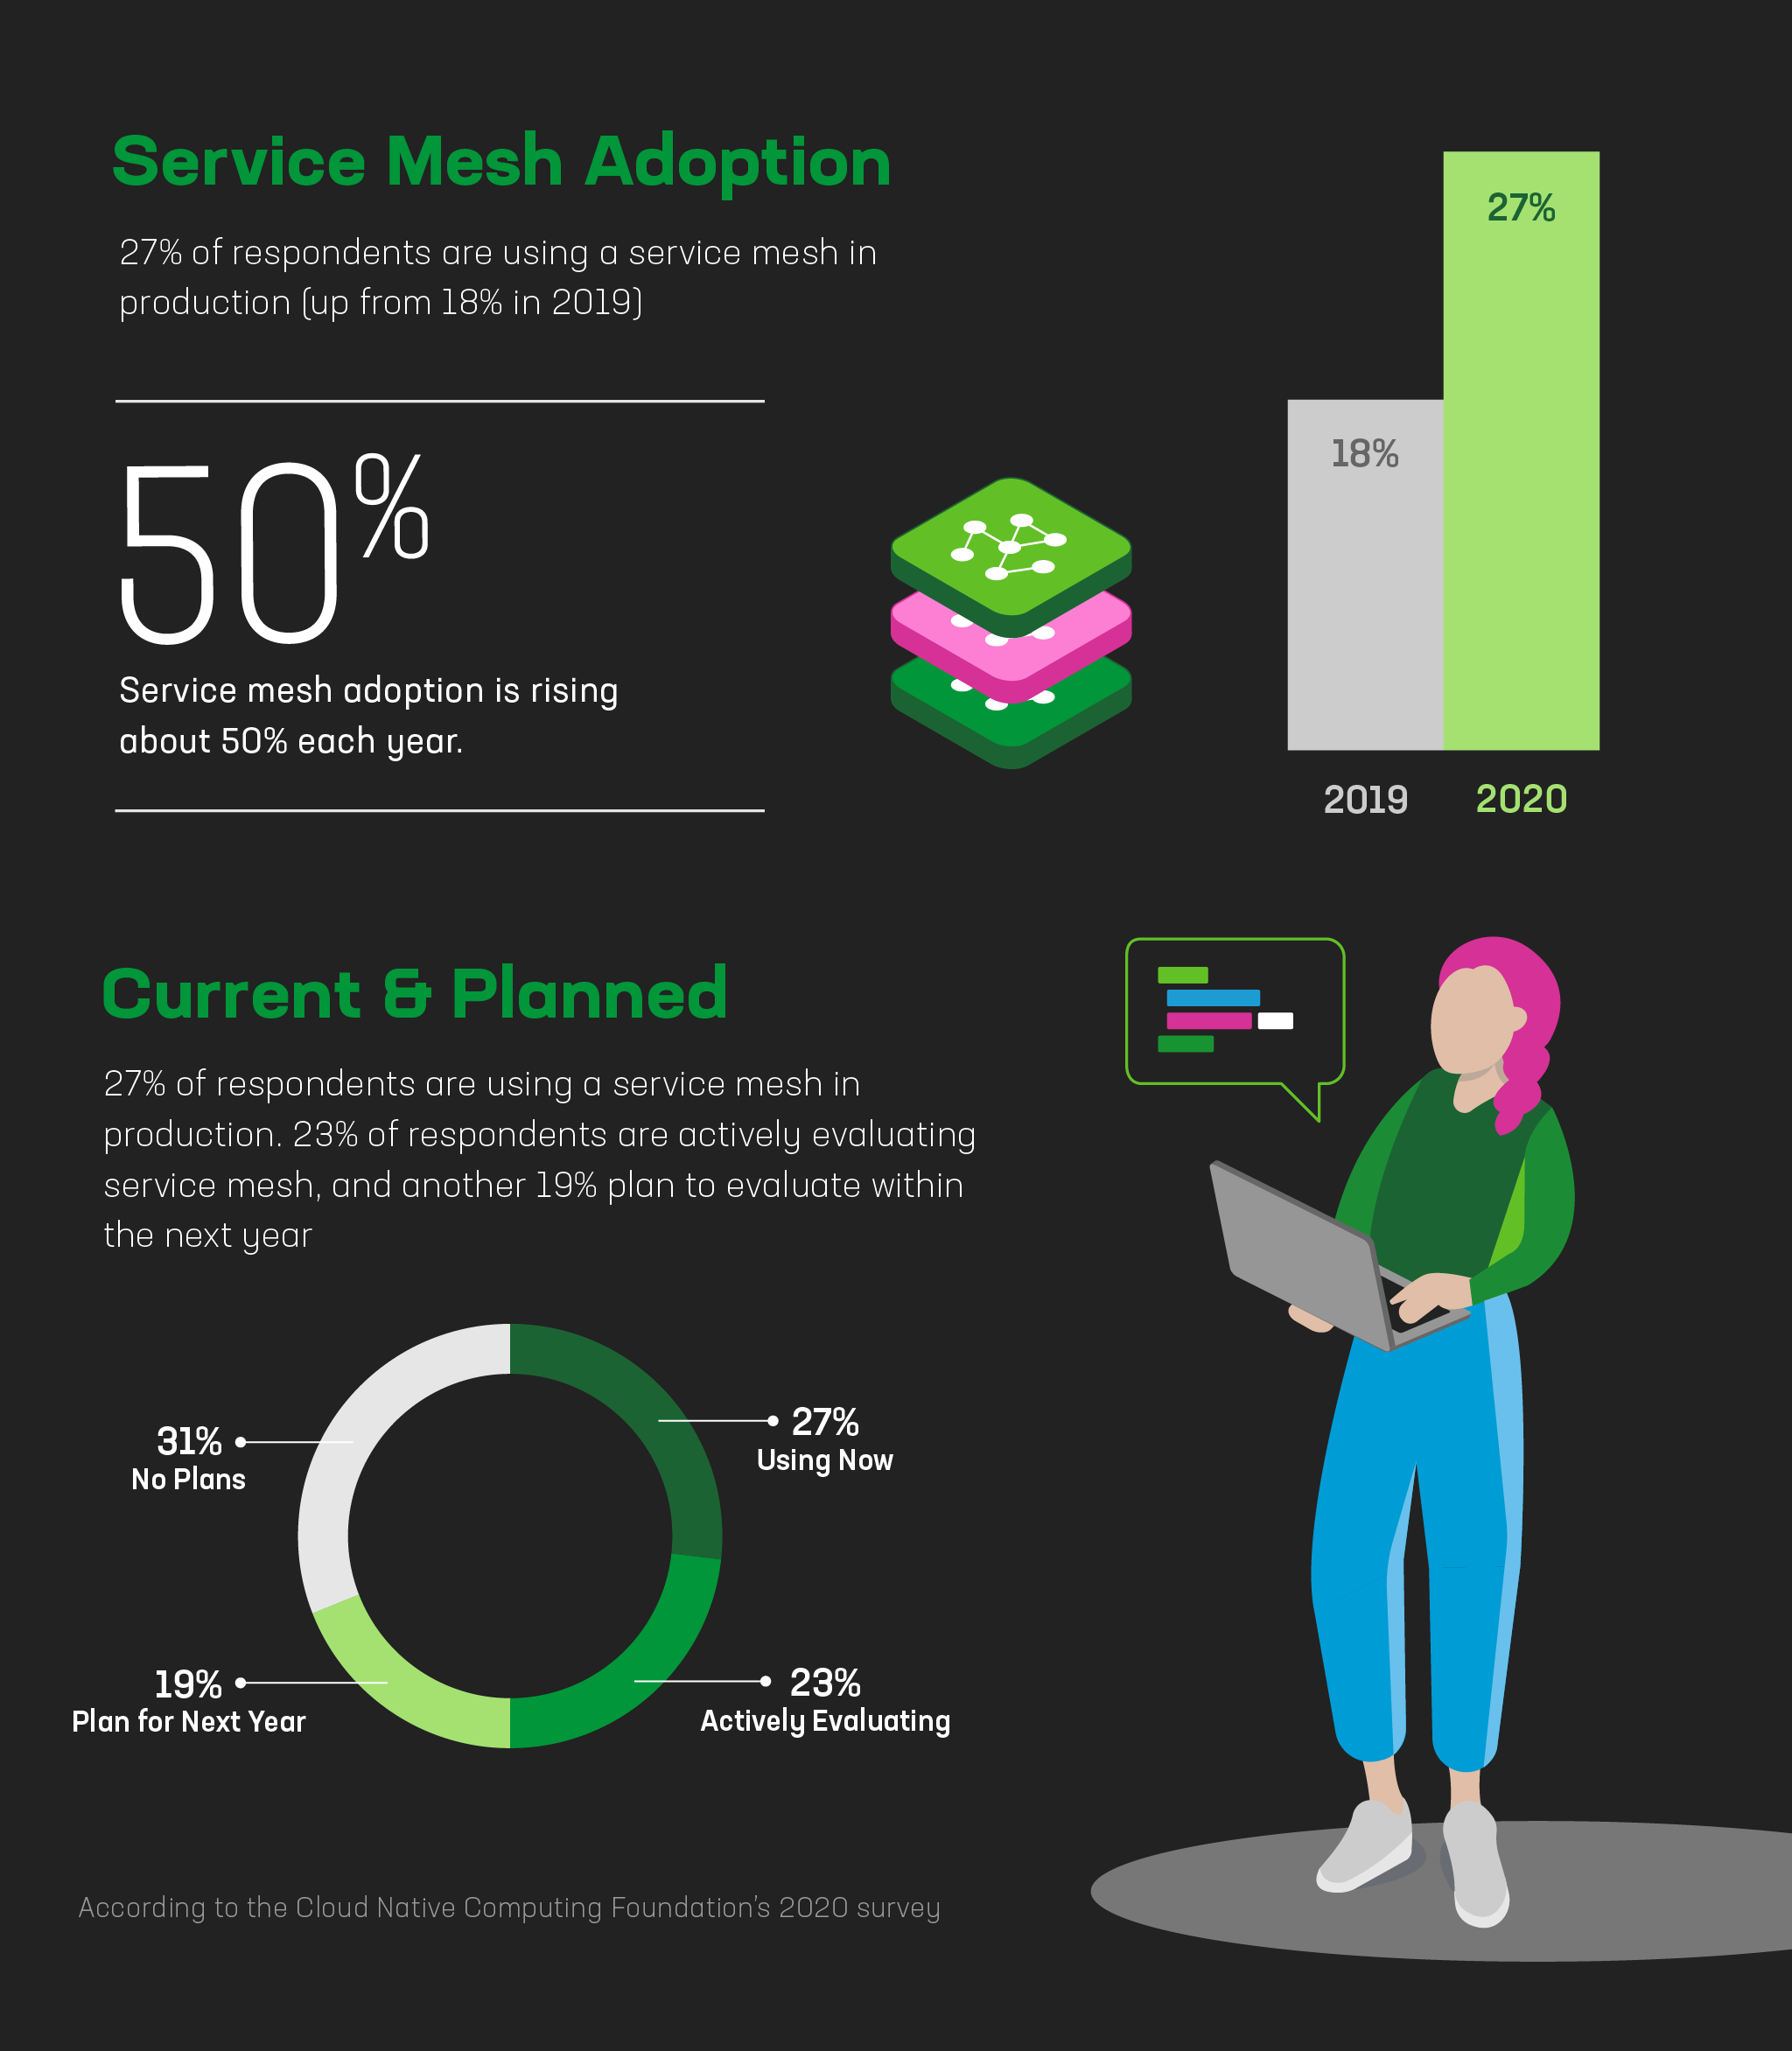 Graphic showing statistics for service mesh adoption in 2020: 27% using in production (vs 19% in 2019), 23% evaluating, 19% plan to evaluate next year, 31% no plans